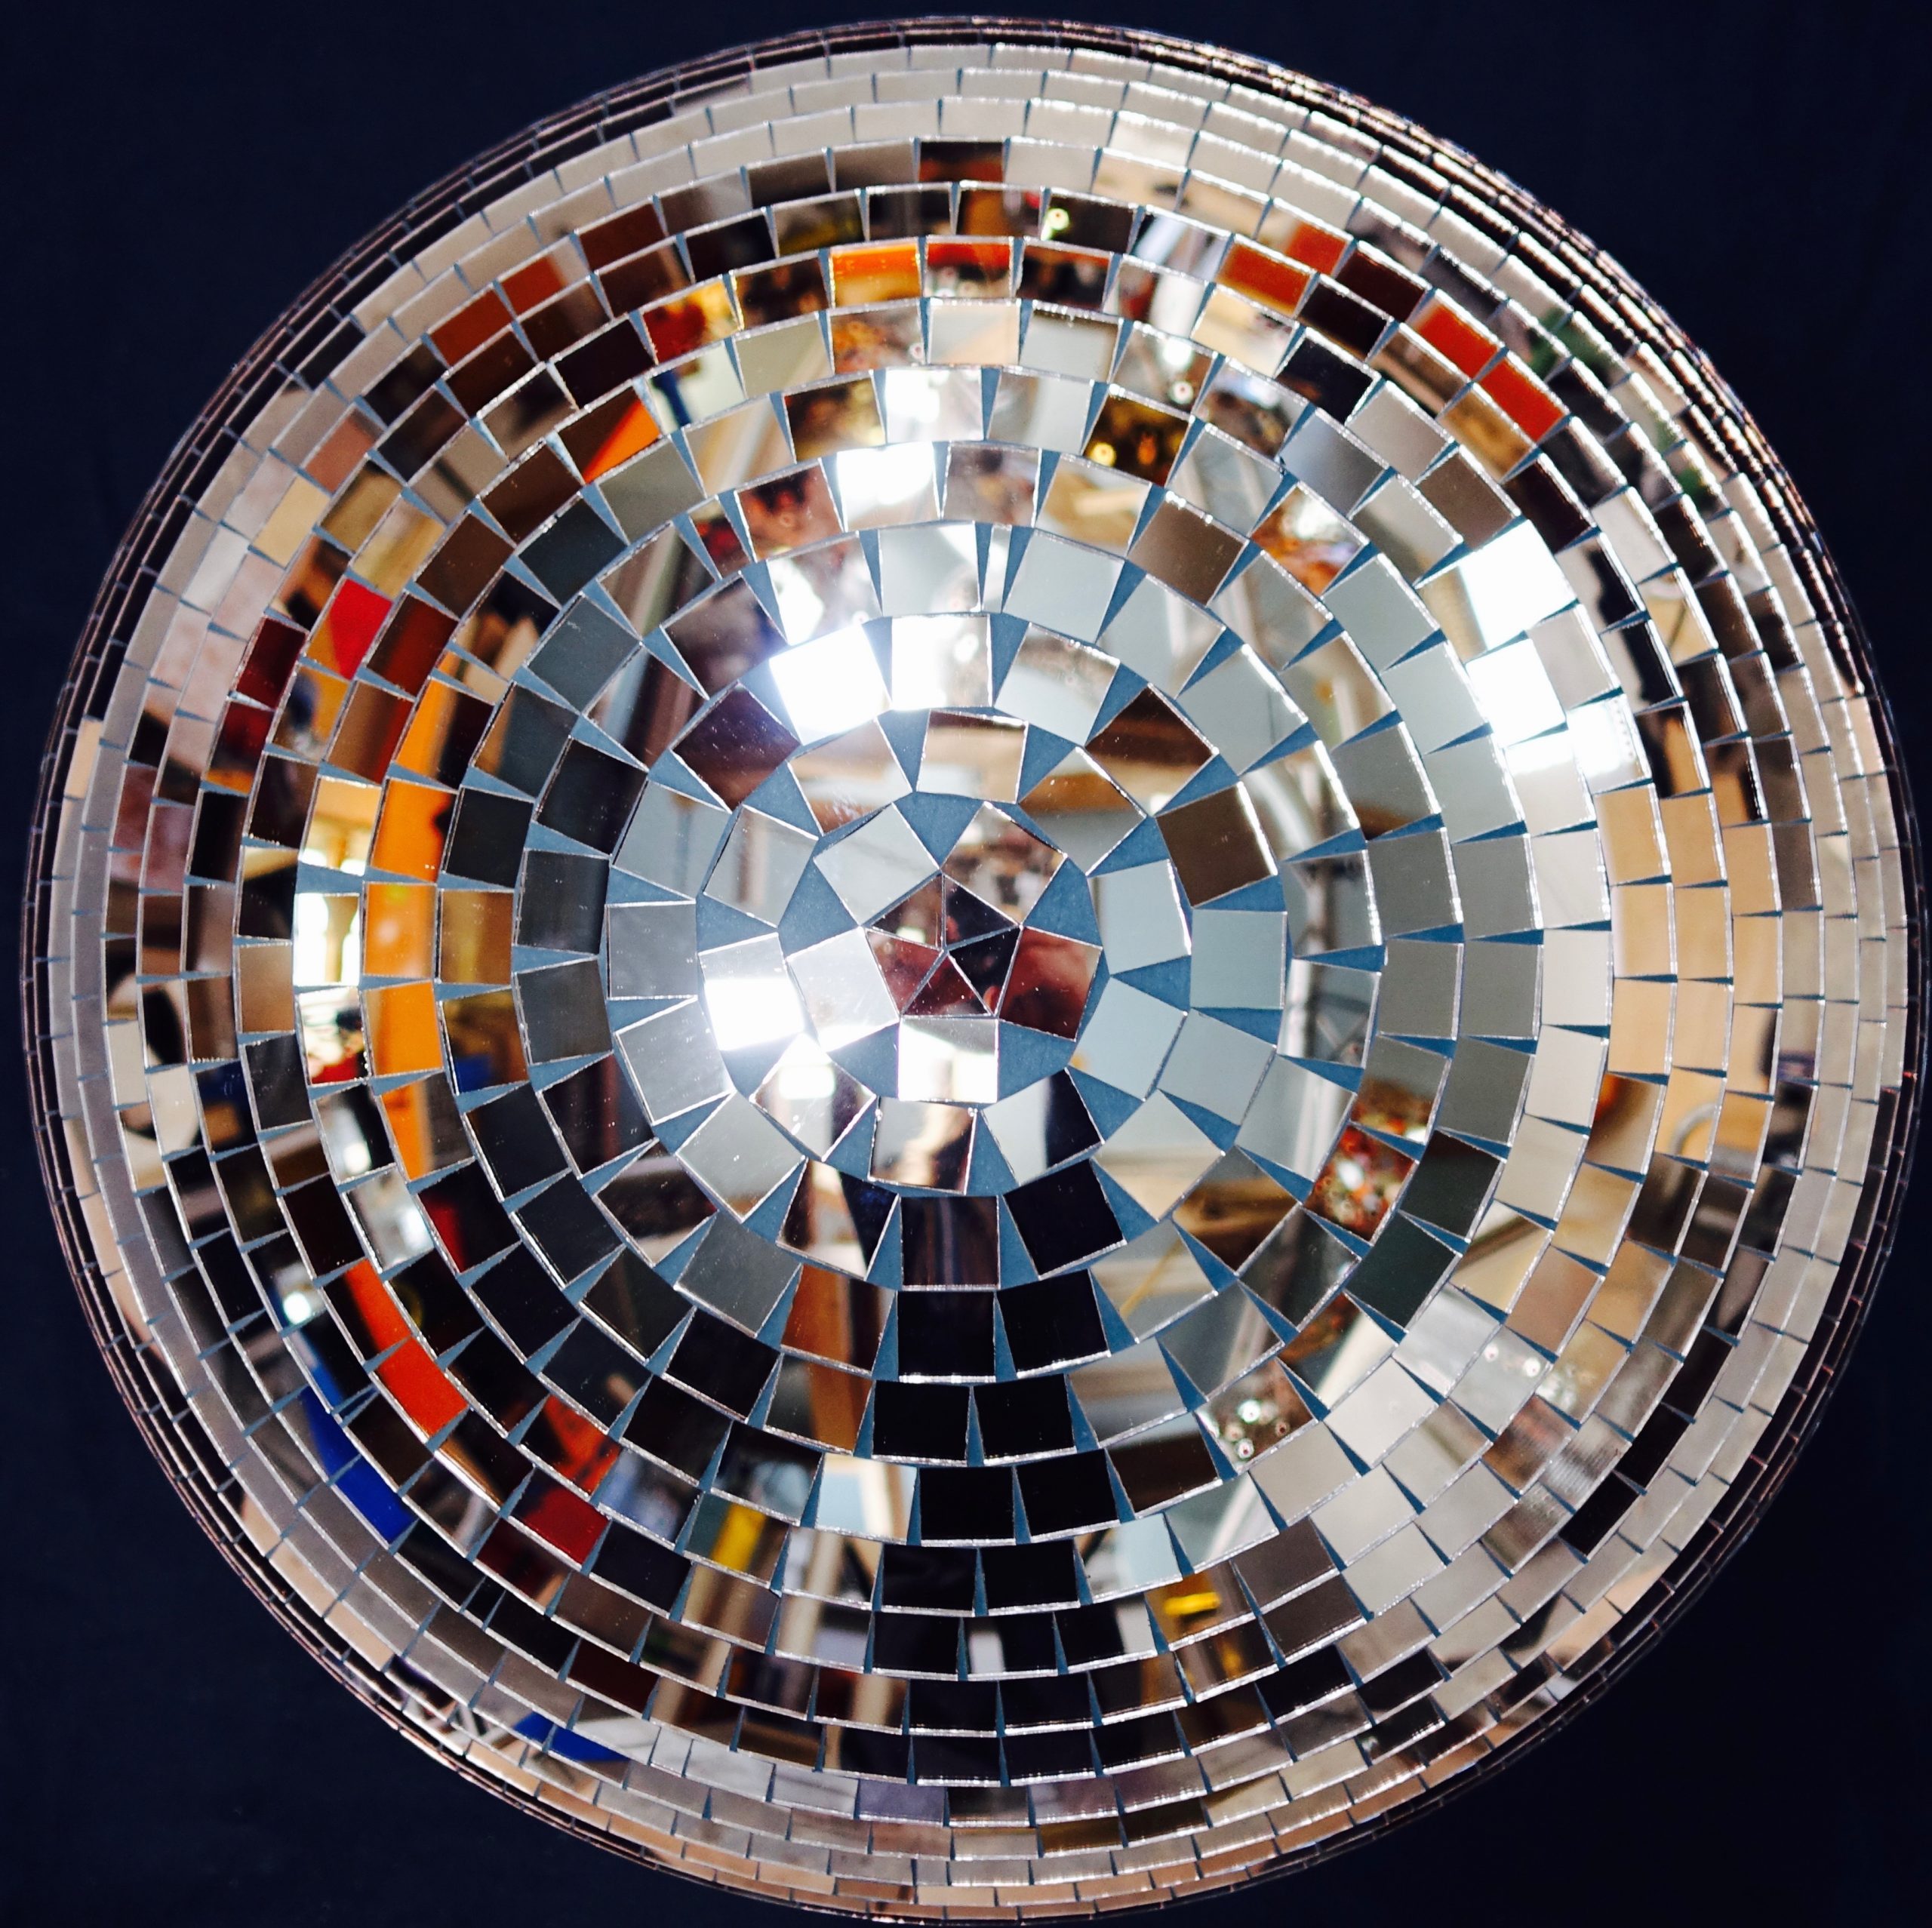 750mm rose gold mirror ball approx weight 25kg dry hire fee - £130 purchase fee - POA